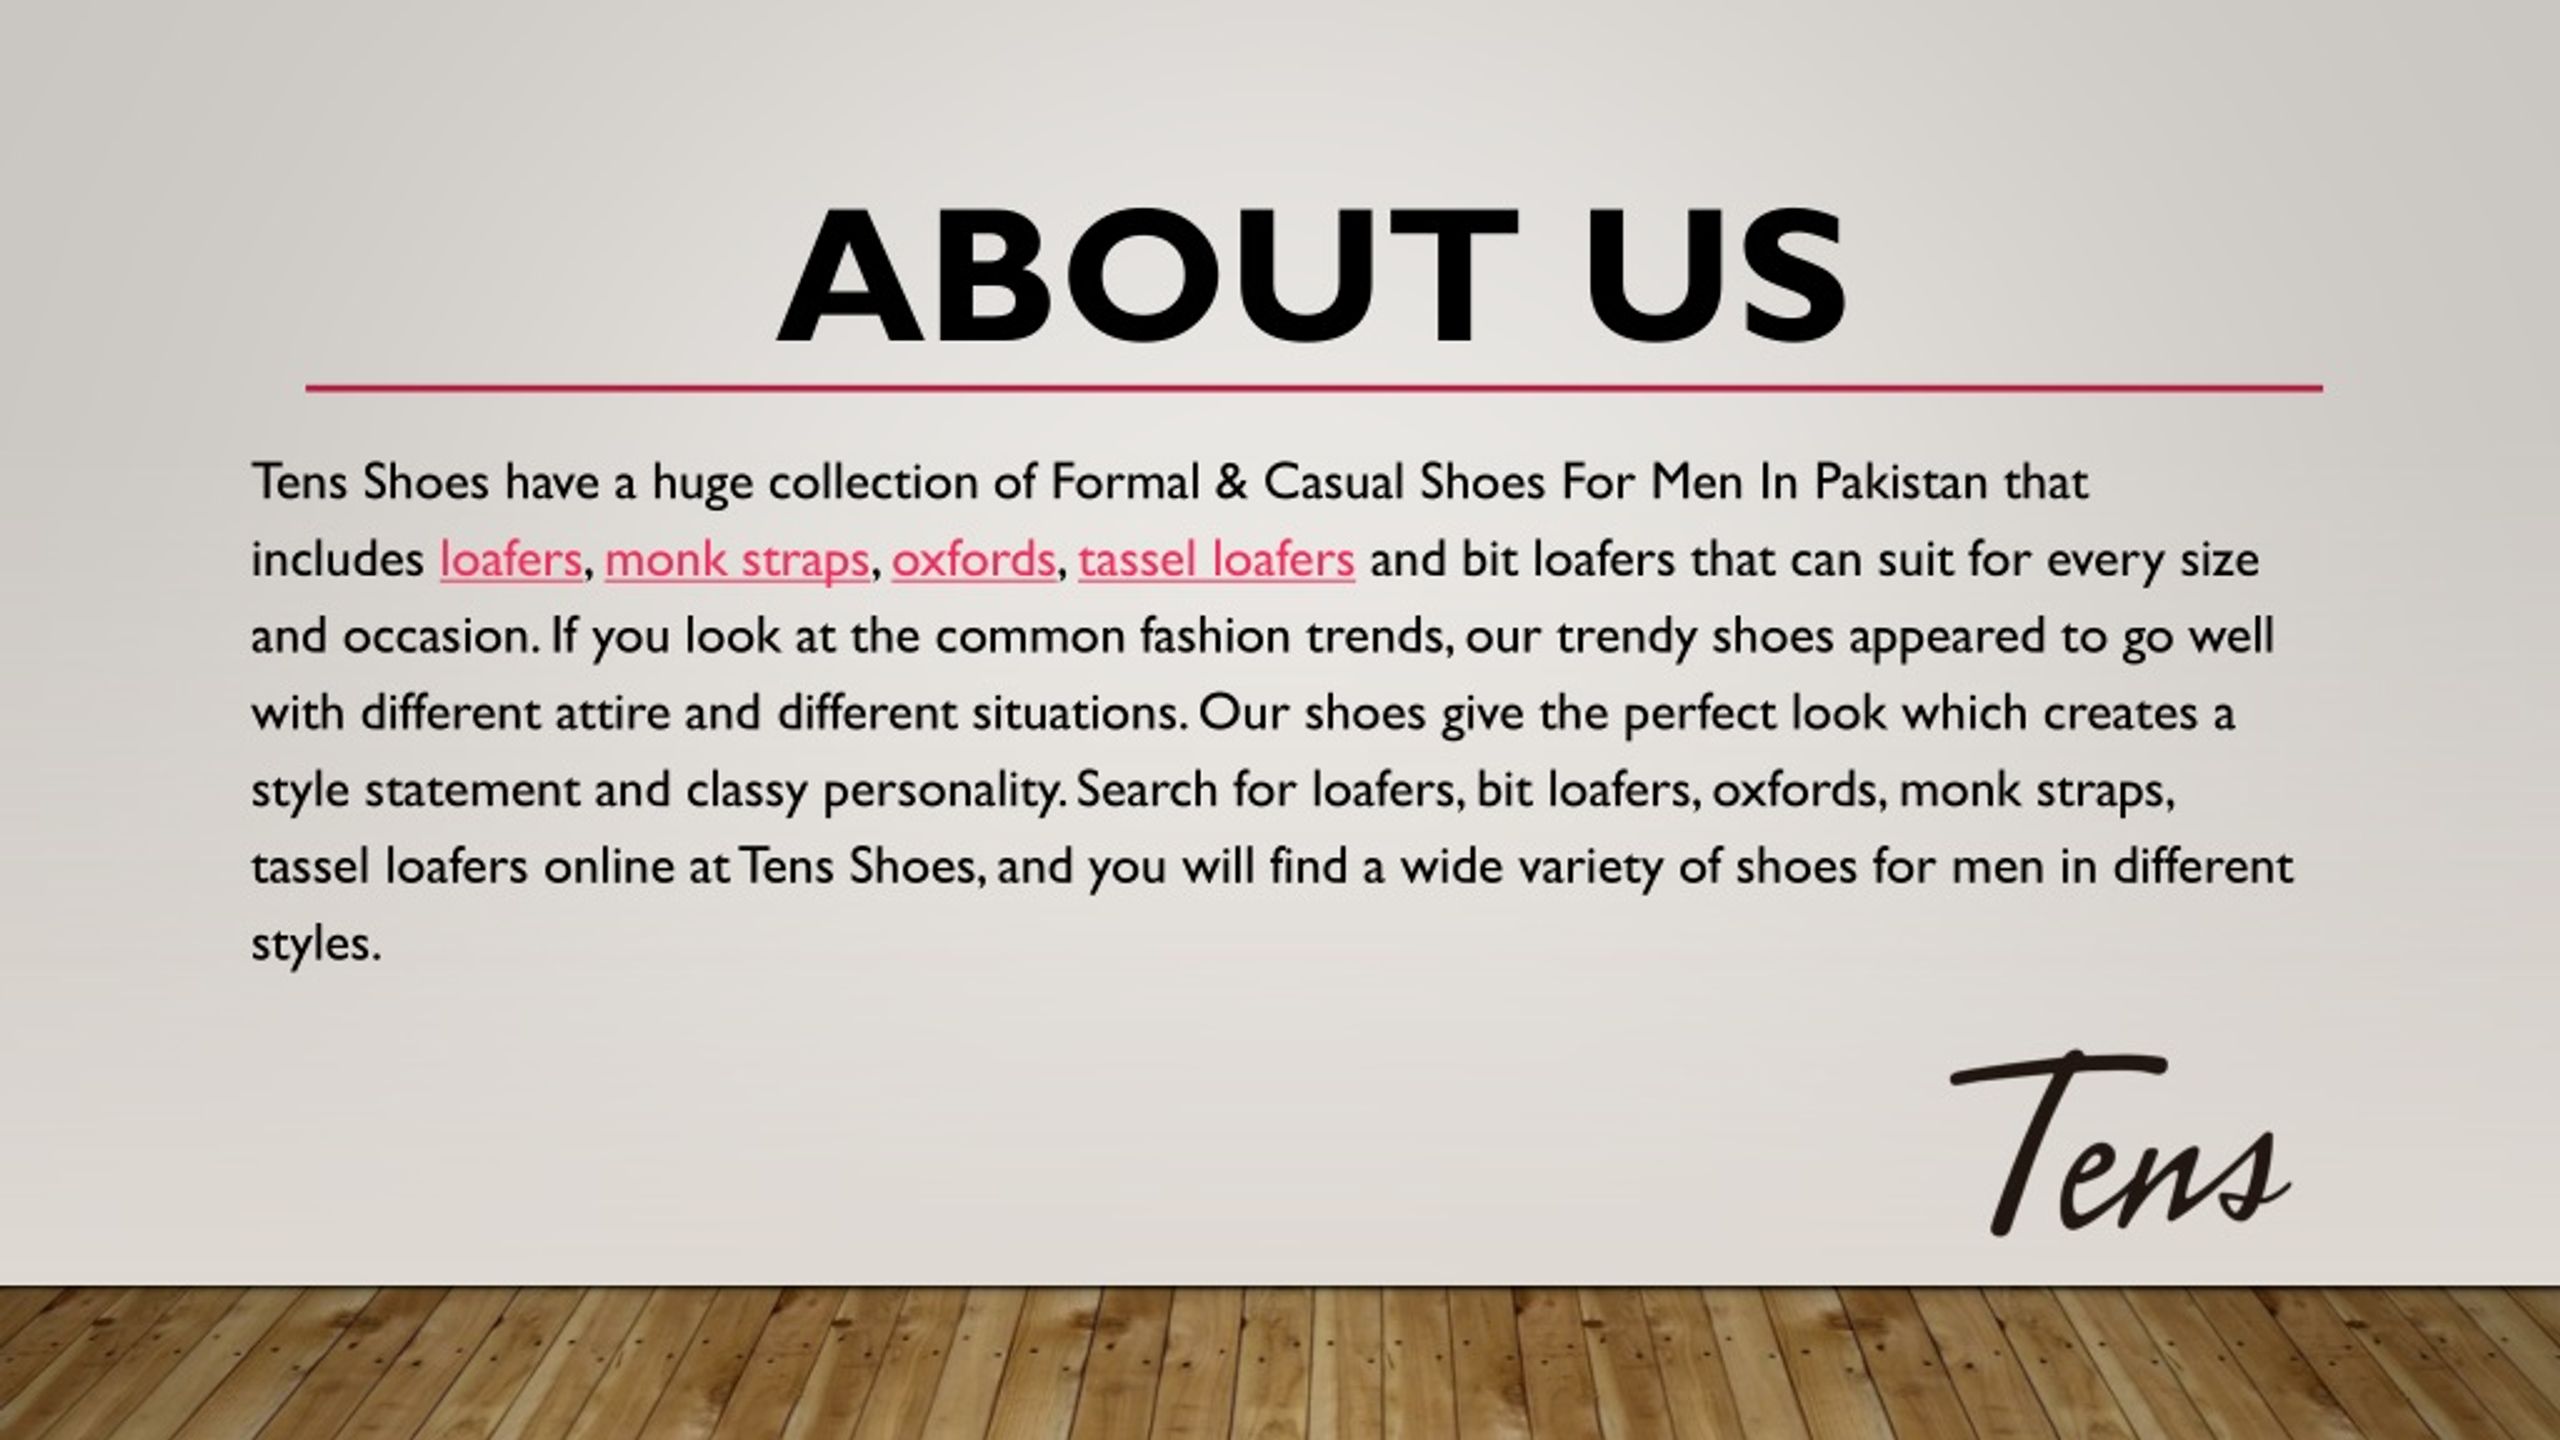 PPT - Buy Loafers in Pakistan | Loafers Shoes for Men | Tens Shoes ...